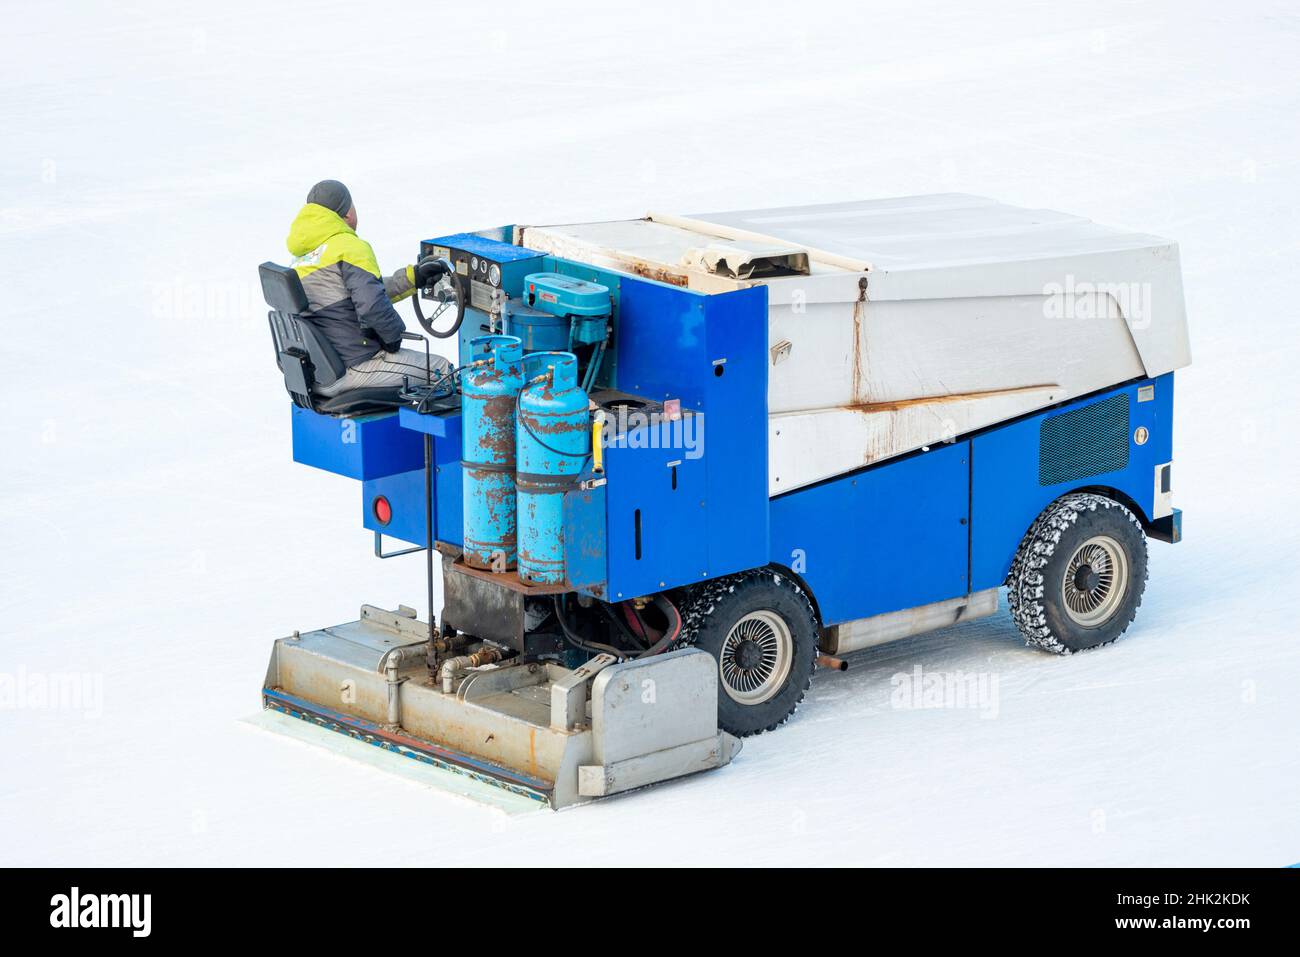 Rear view of old rusty Zamboni ice resurfacer maintaining outdoor ice skating rink Stock Photo